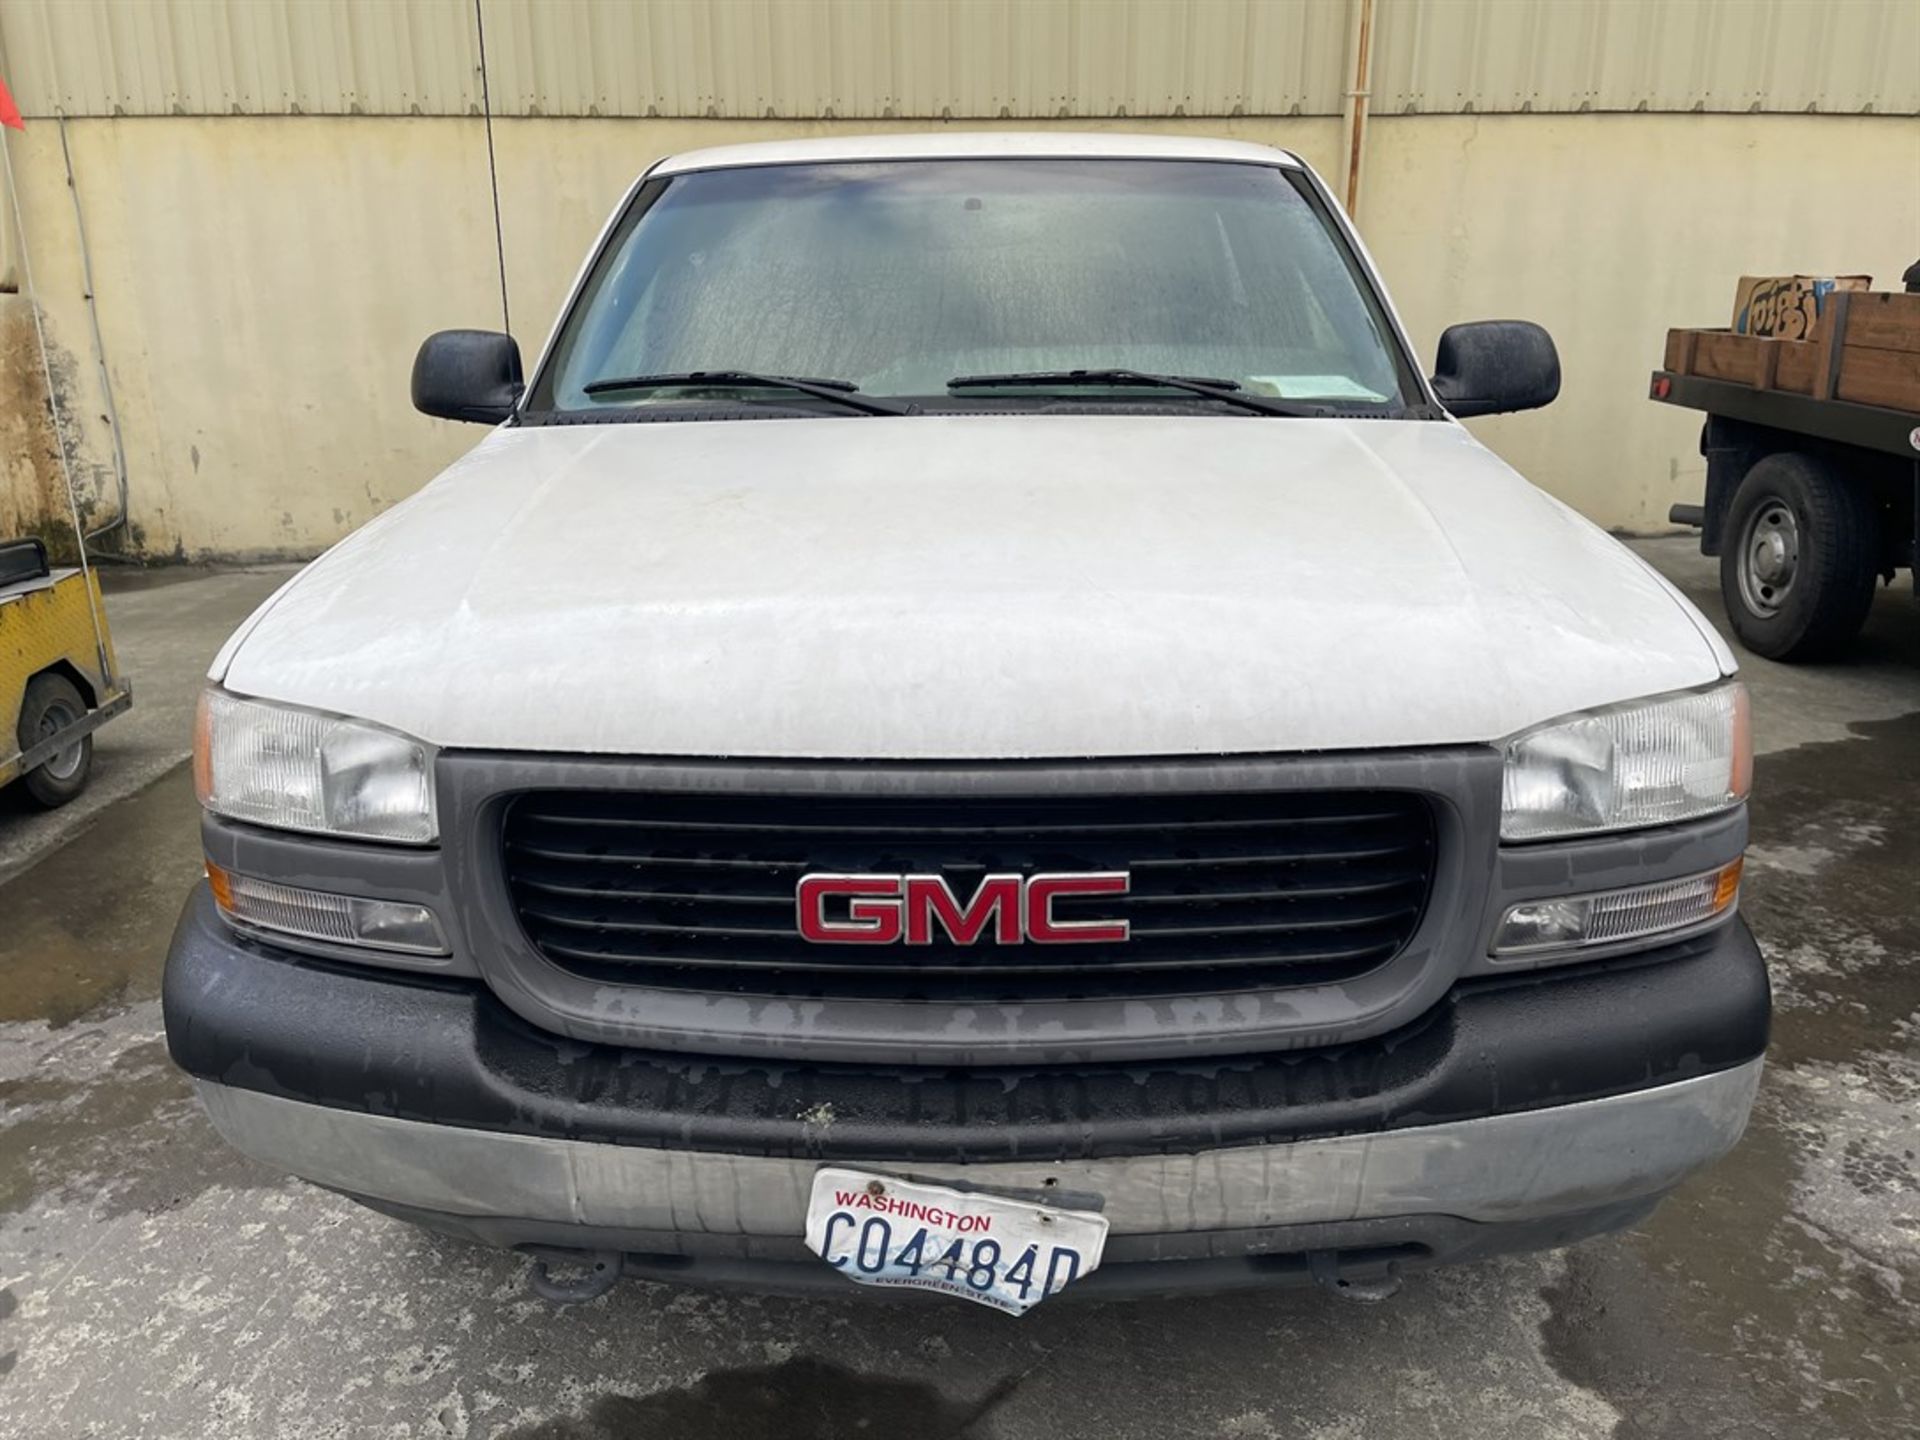 GMC 1500 Pickup Truck, VIN #1GTEC14WXXE524836, 70,036 Miles - Image 2 of 10